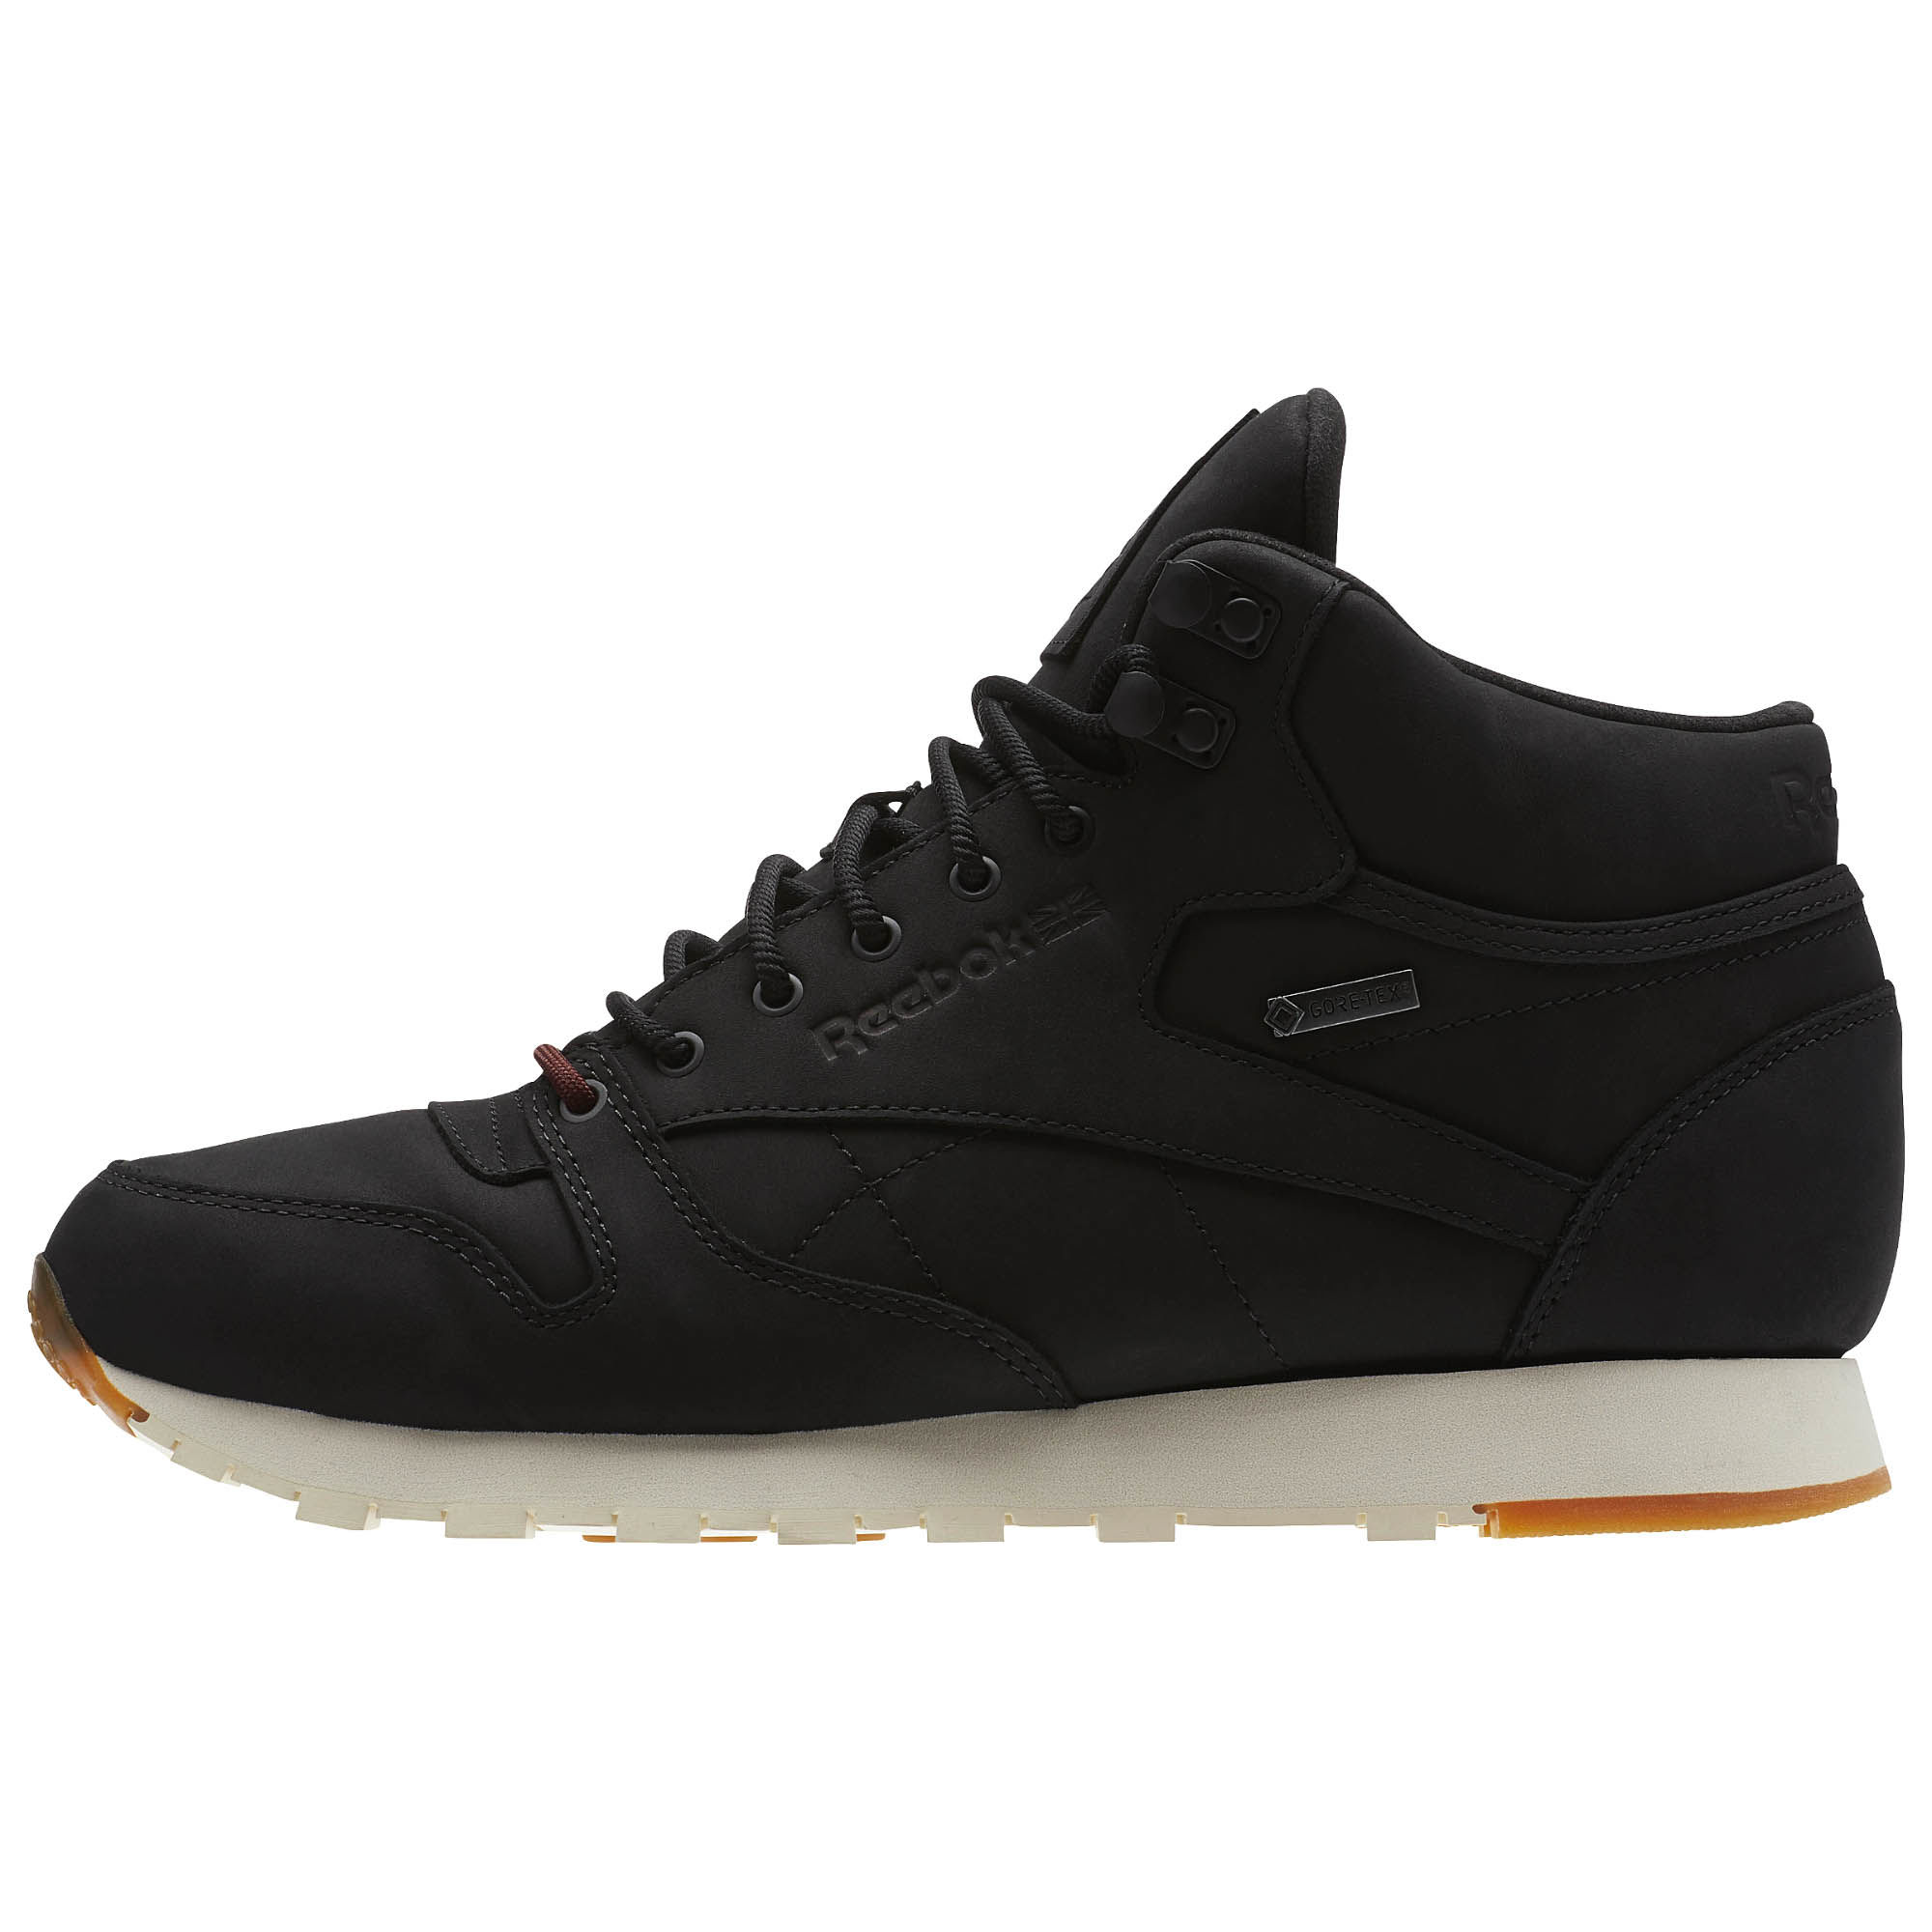 The Classic Leather Mid is Winter-Ready with GORE-TEX and Thinsulate - WearTesters